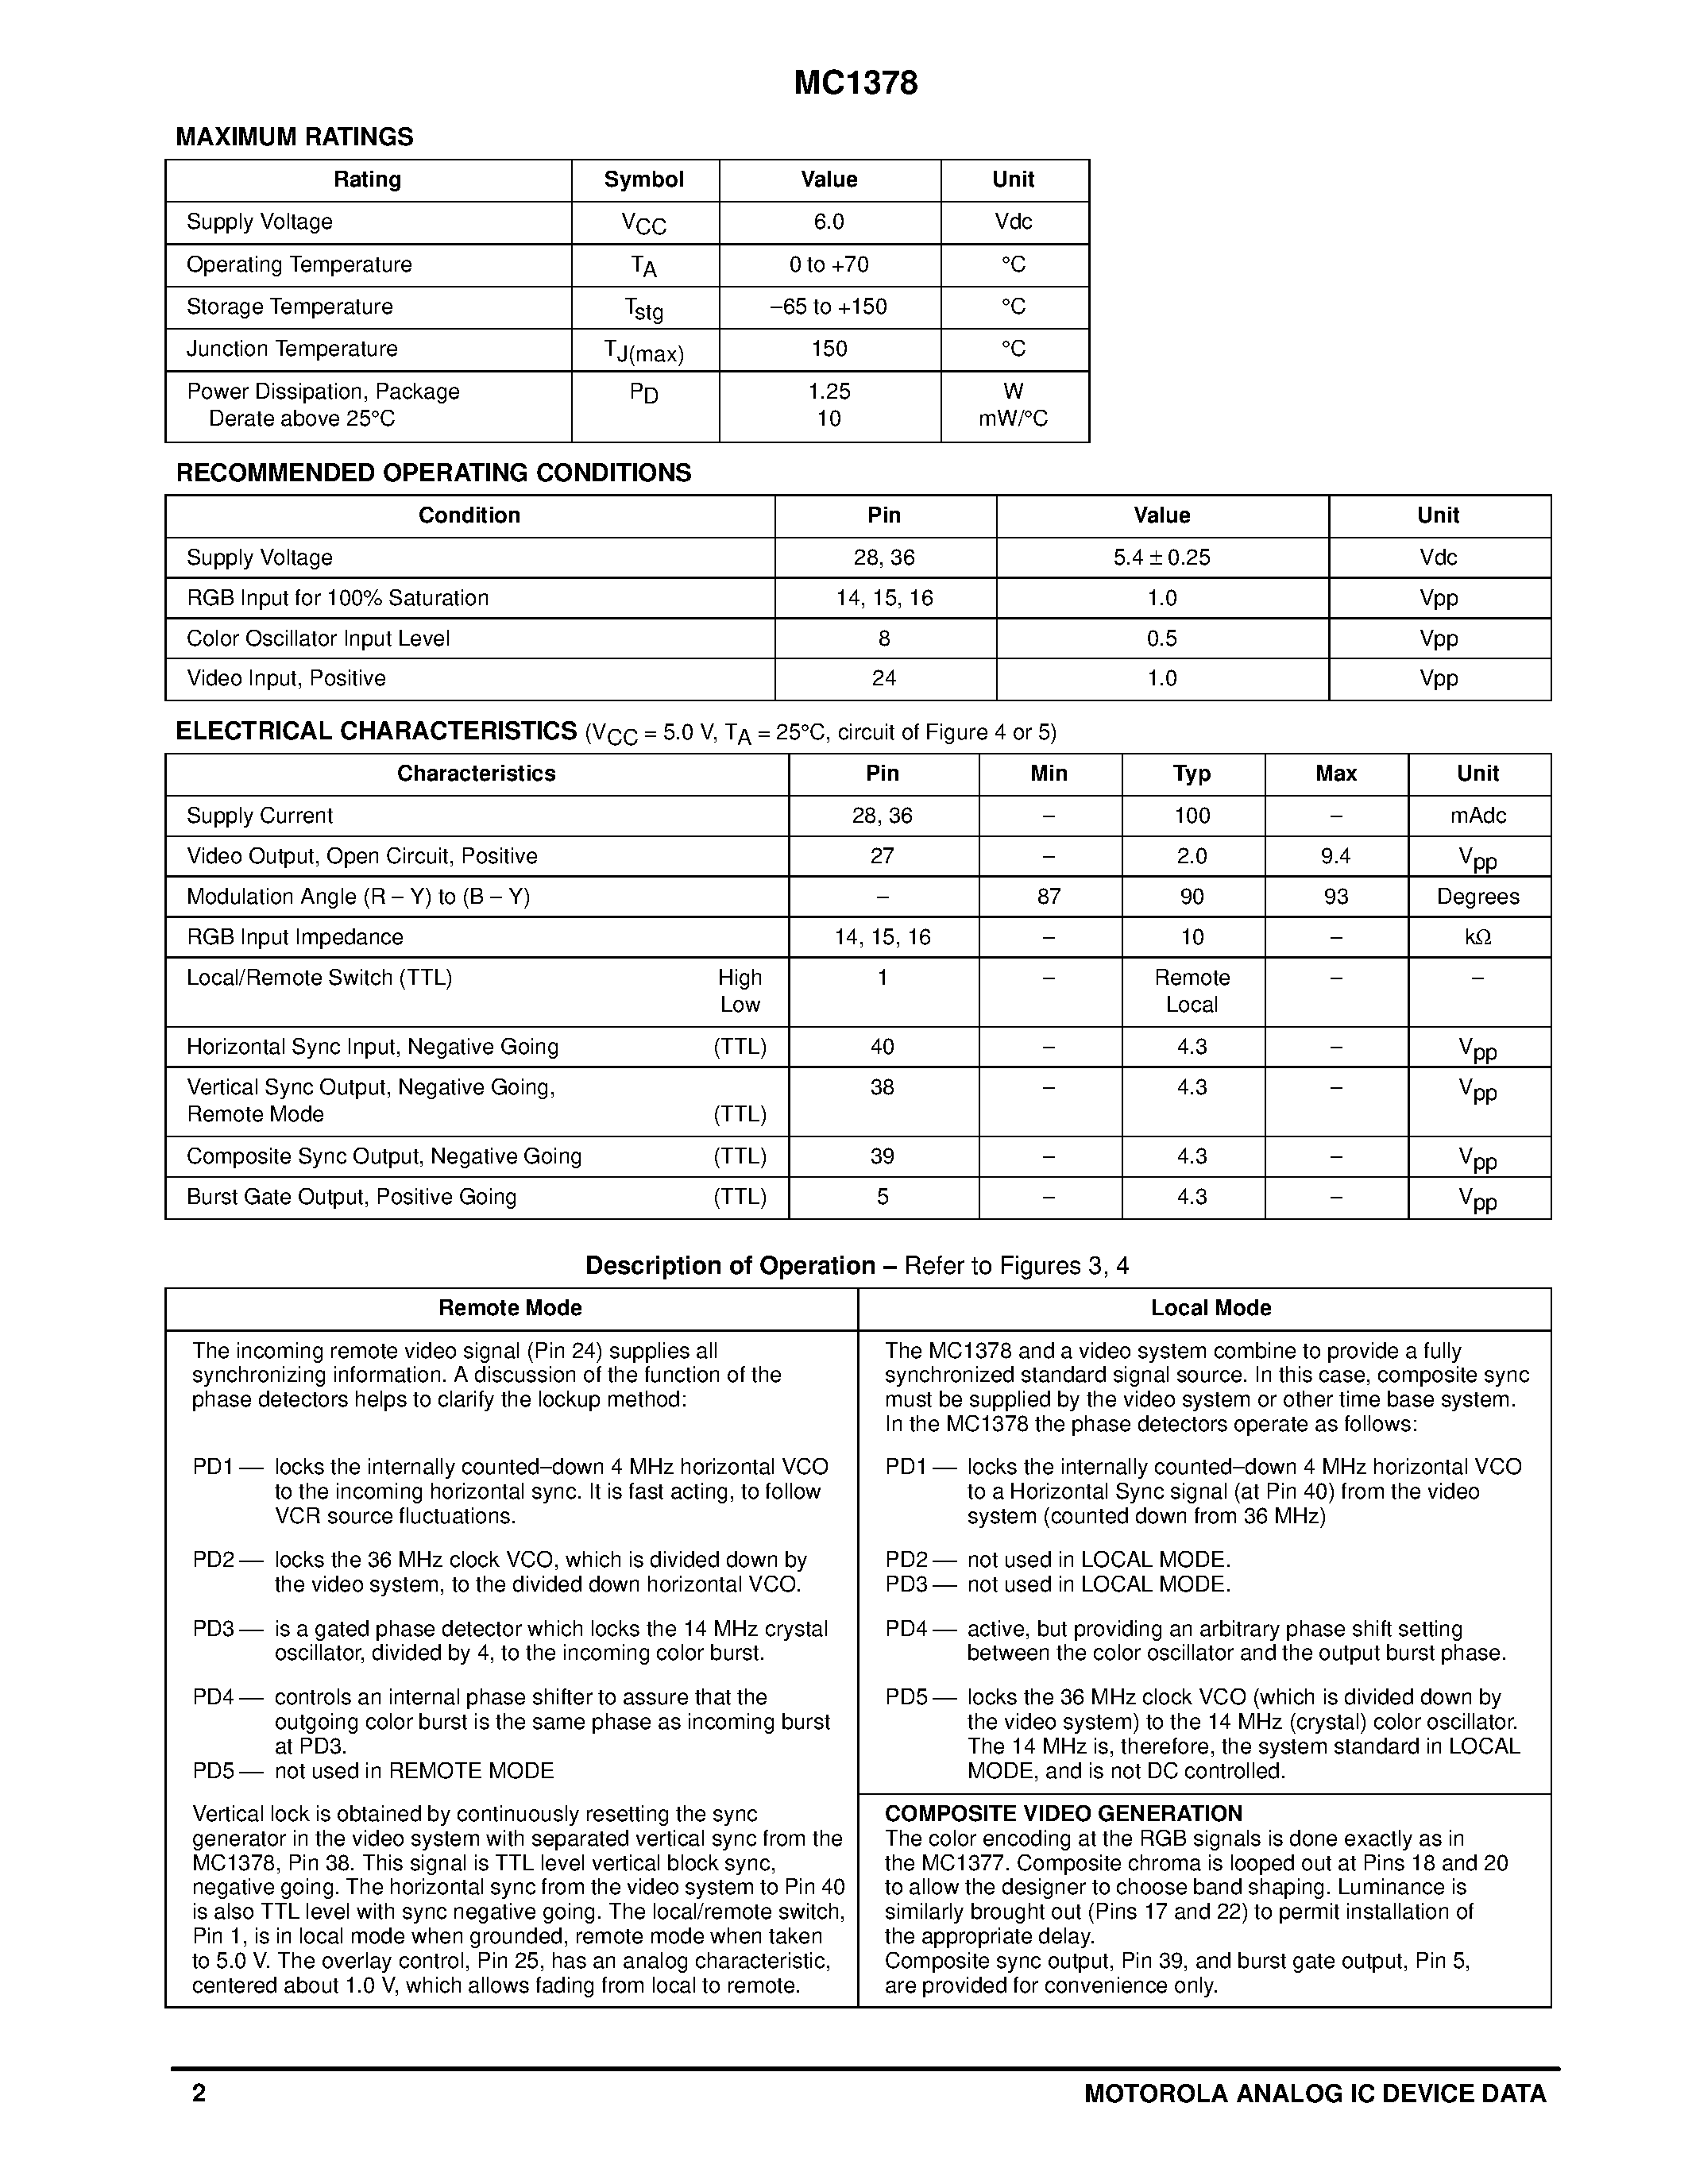 Datasheet MC1378FN - COLOR TELEVISION COMPOSITE VIDEO OVERLAY SYNCHRONIZER page 2